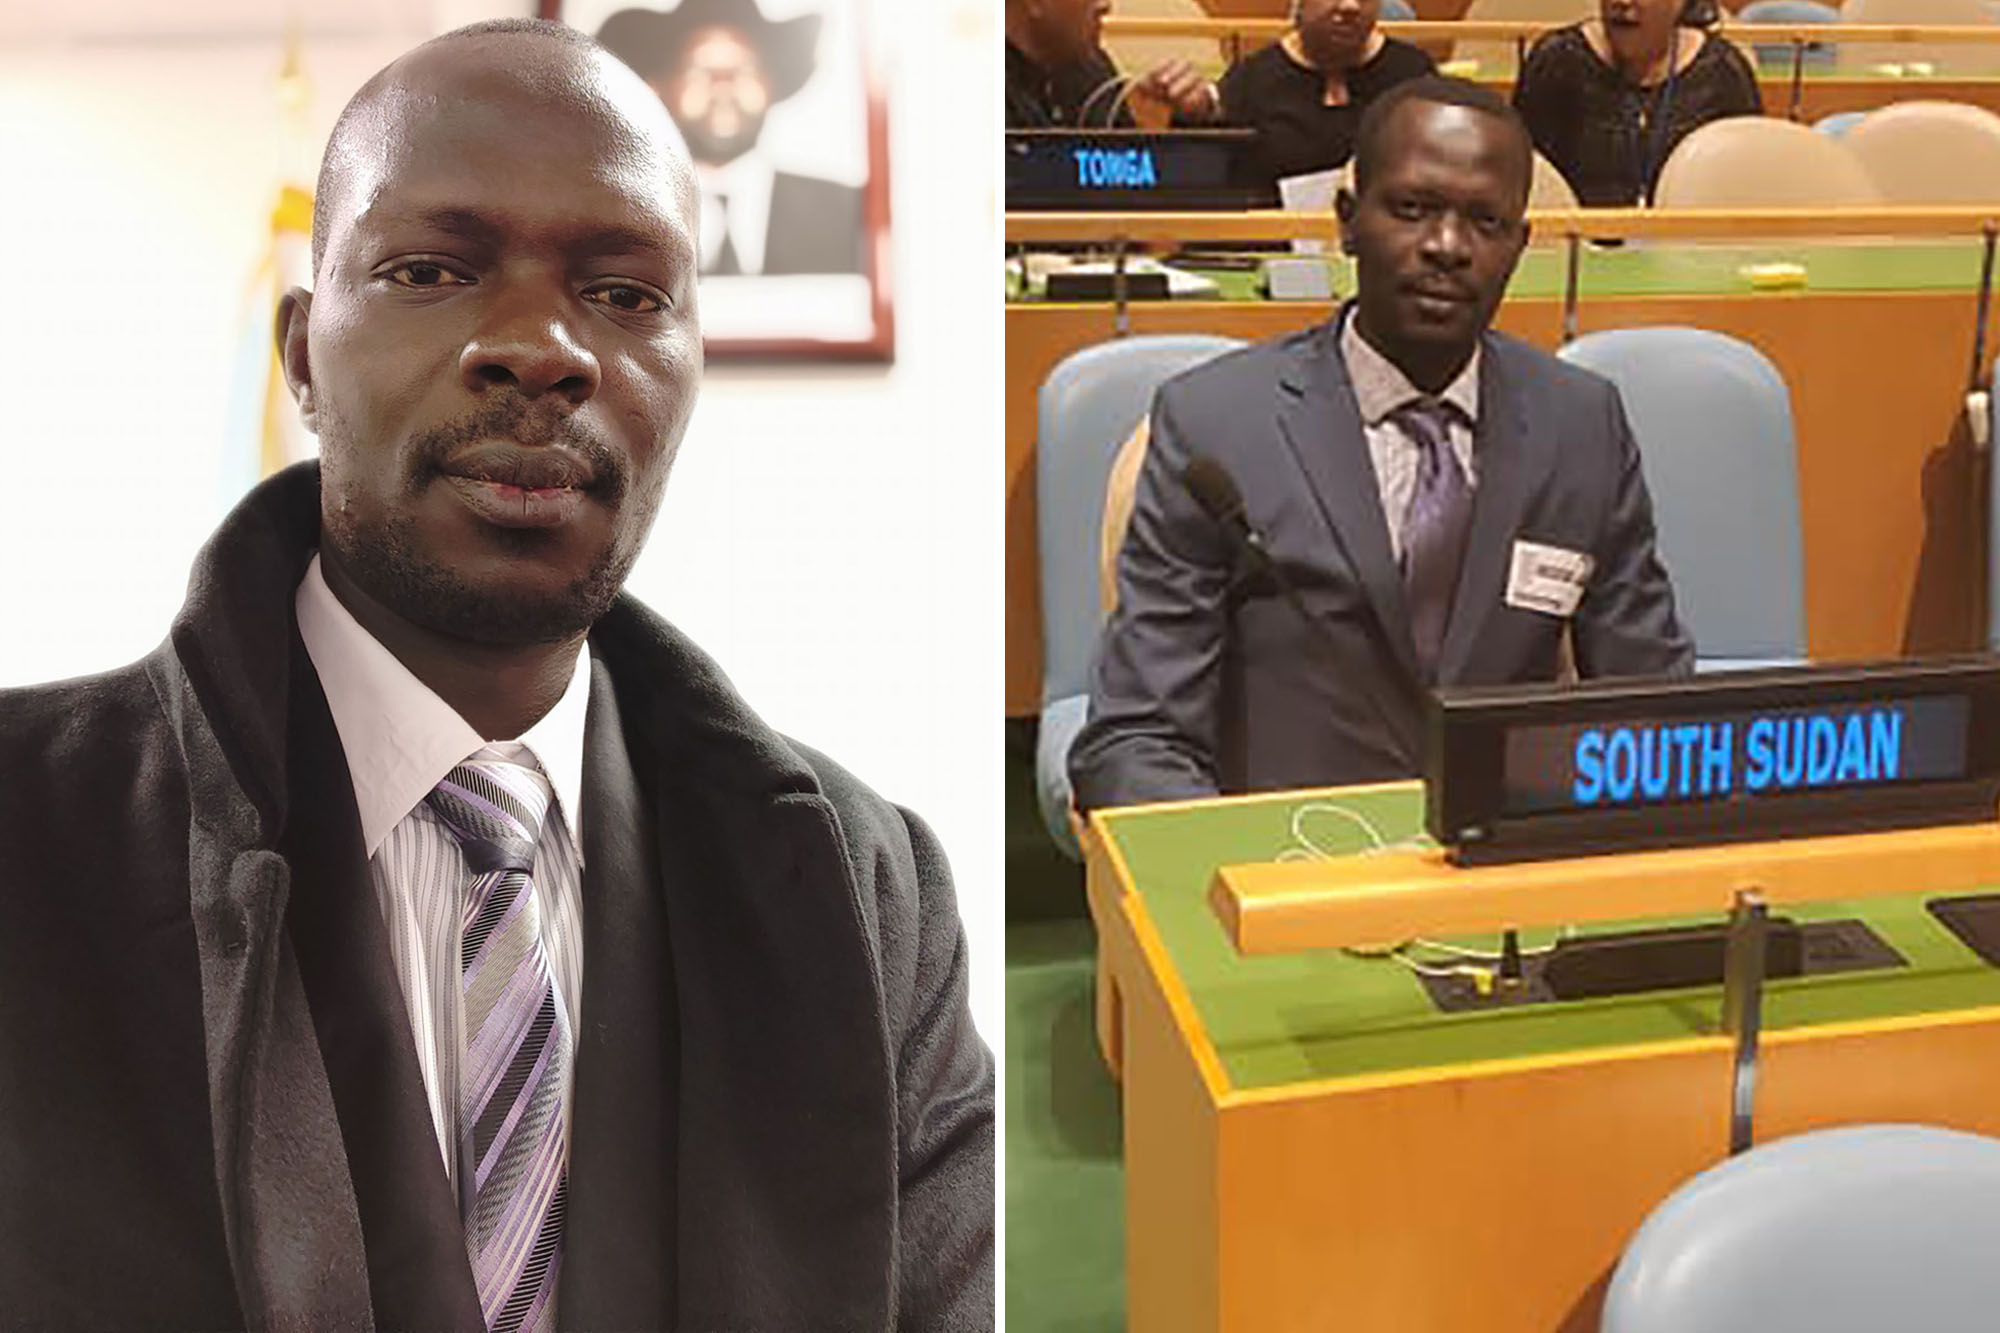 Charles Dickens Imene Oliha, 46 – a career diplomat for the Ministry of Foreign Affairs and International Cooperation in South Sudan – was arrested in connection to the broad-daylight Upper Manhattan rape, but released due to his diplomatic immunity.